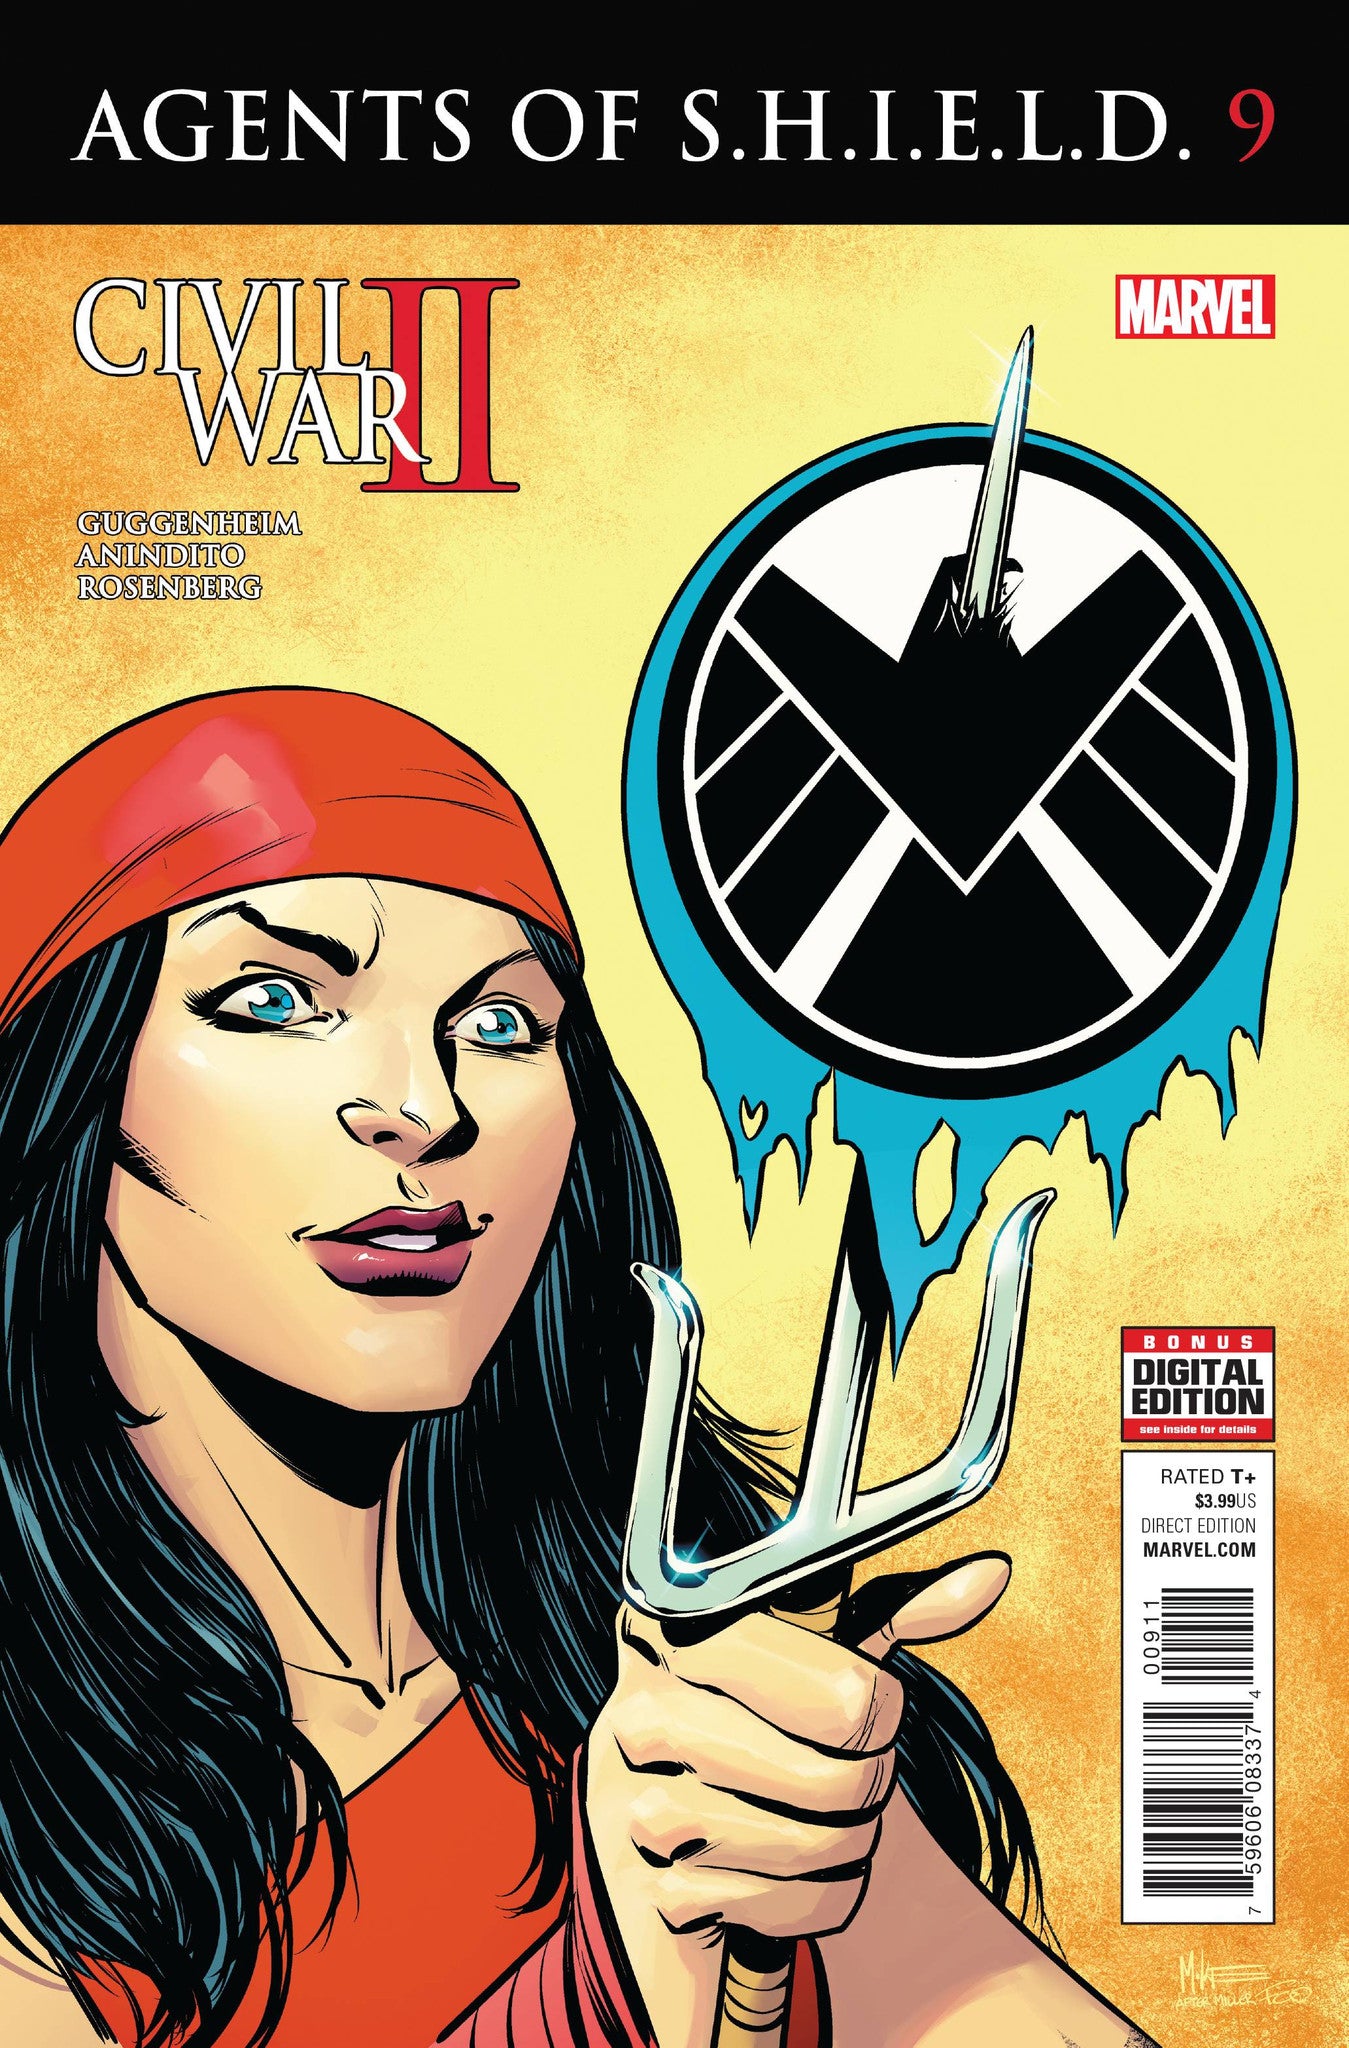 AGENTS OF SHIELD #9 CW2 COVER